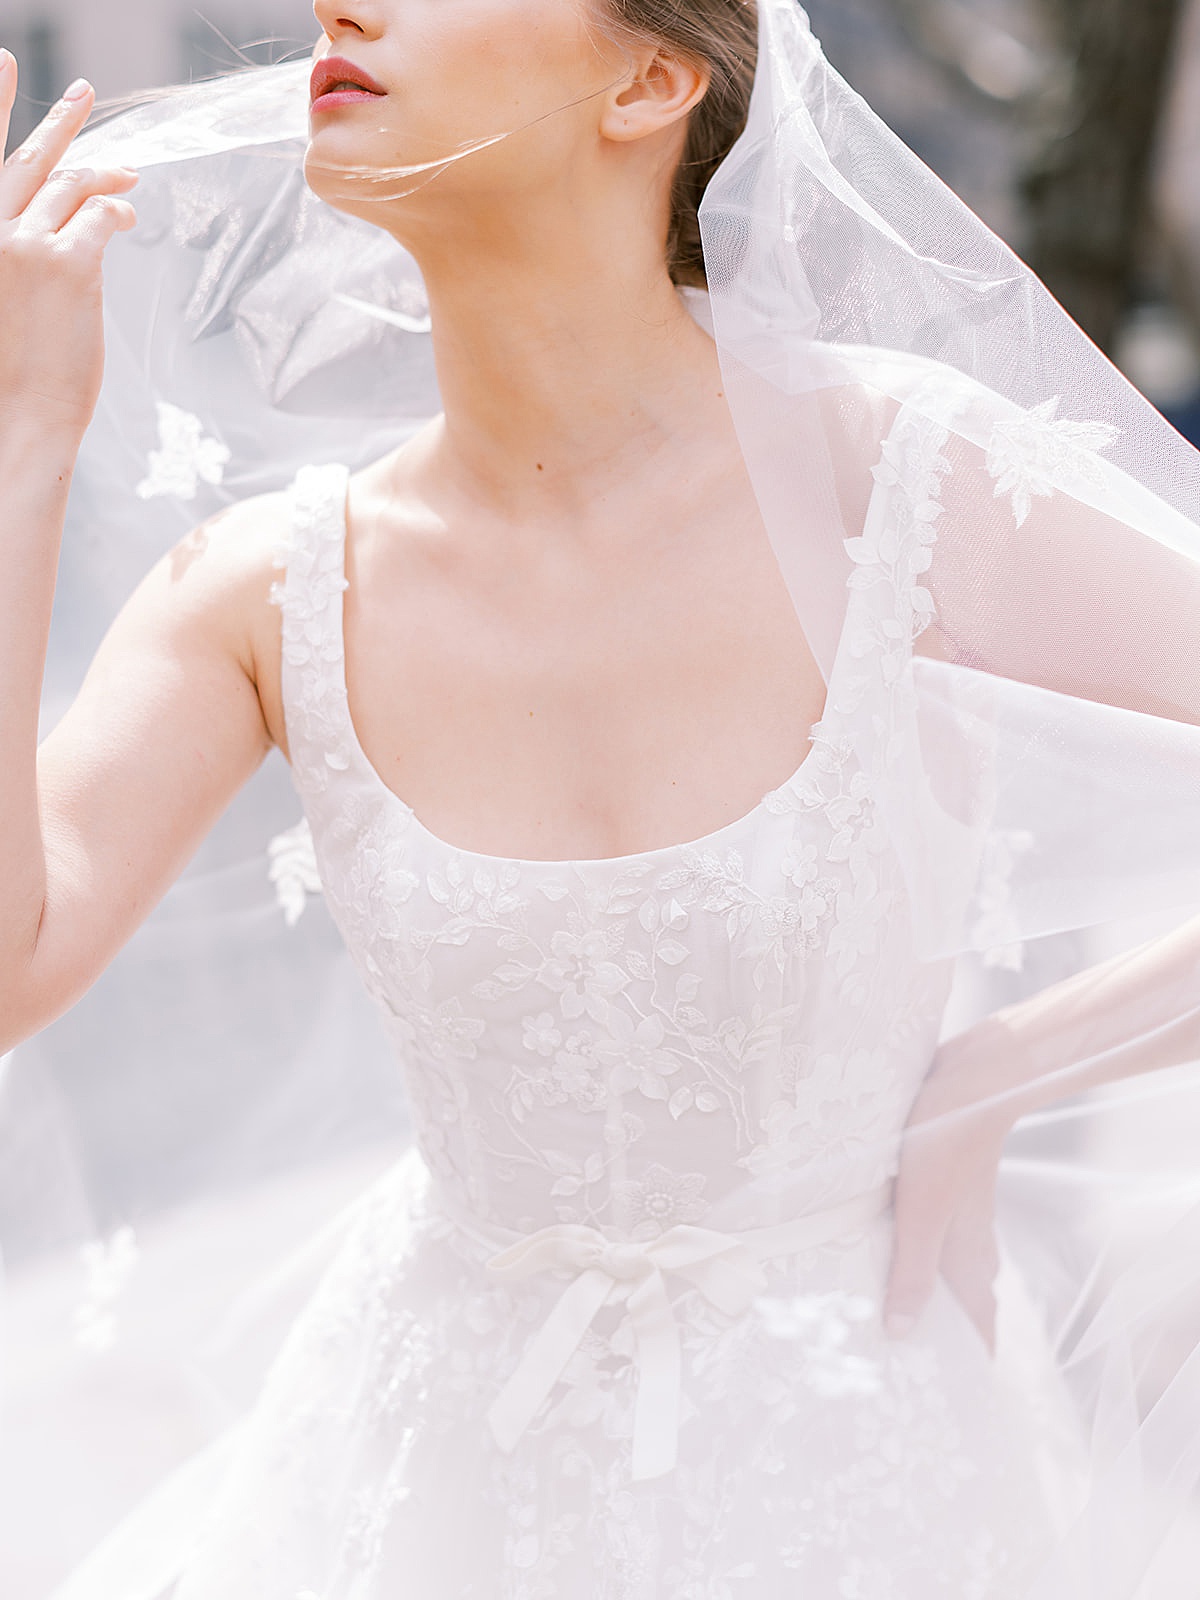 detail of woman in embellished wedding gown with lace trimmed veil shot by NYC Fashion Photographer